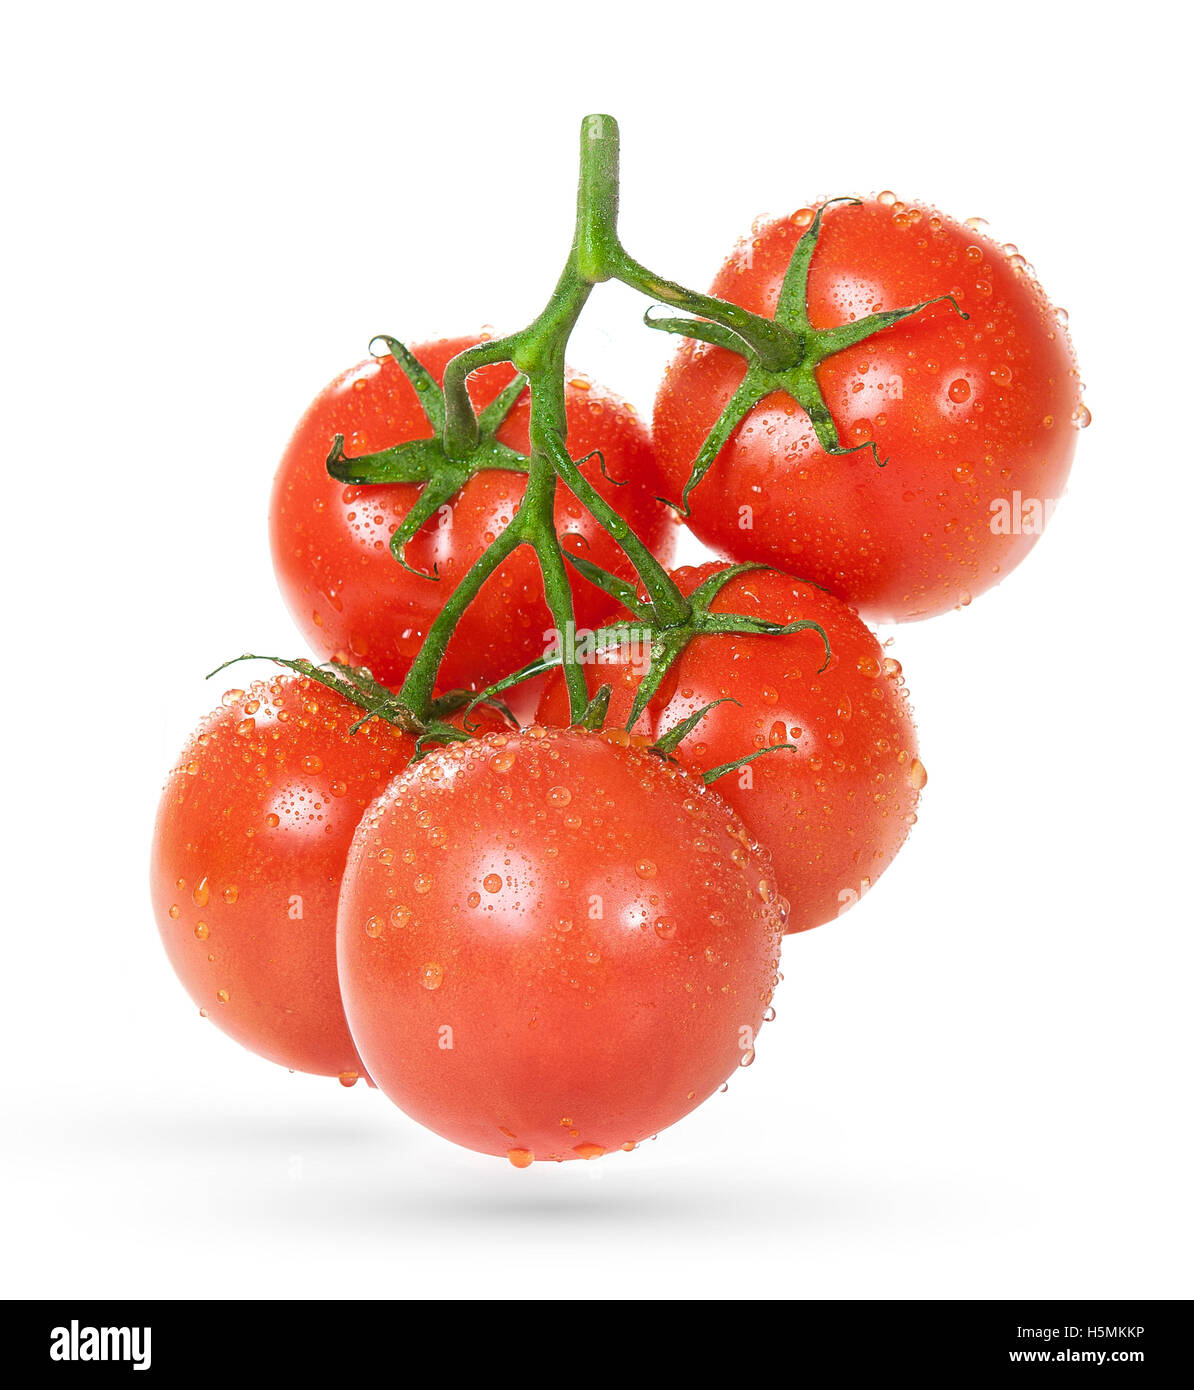 Tomatoes with drops of water on a white background Stock Photo